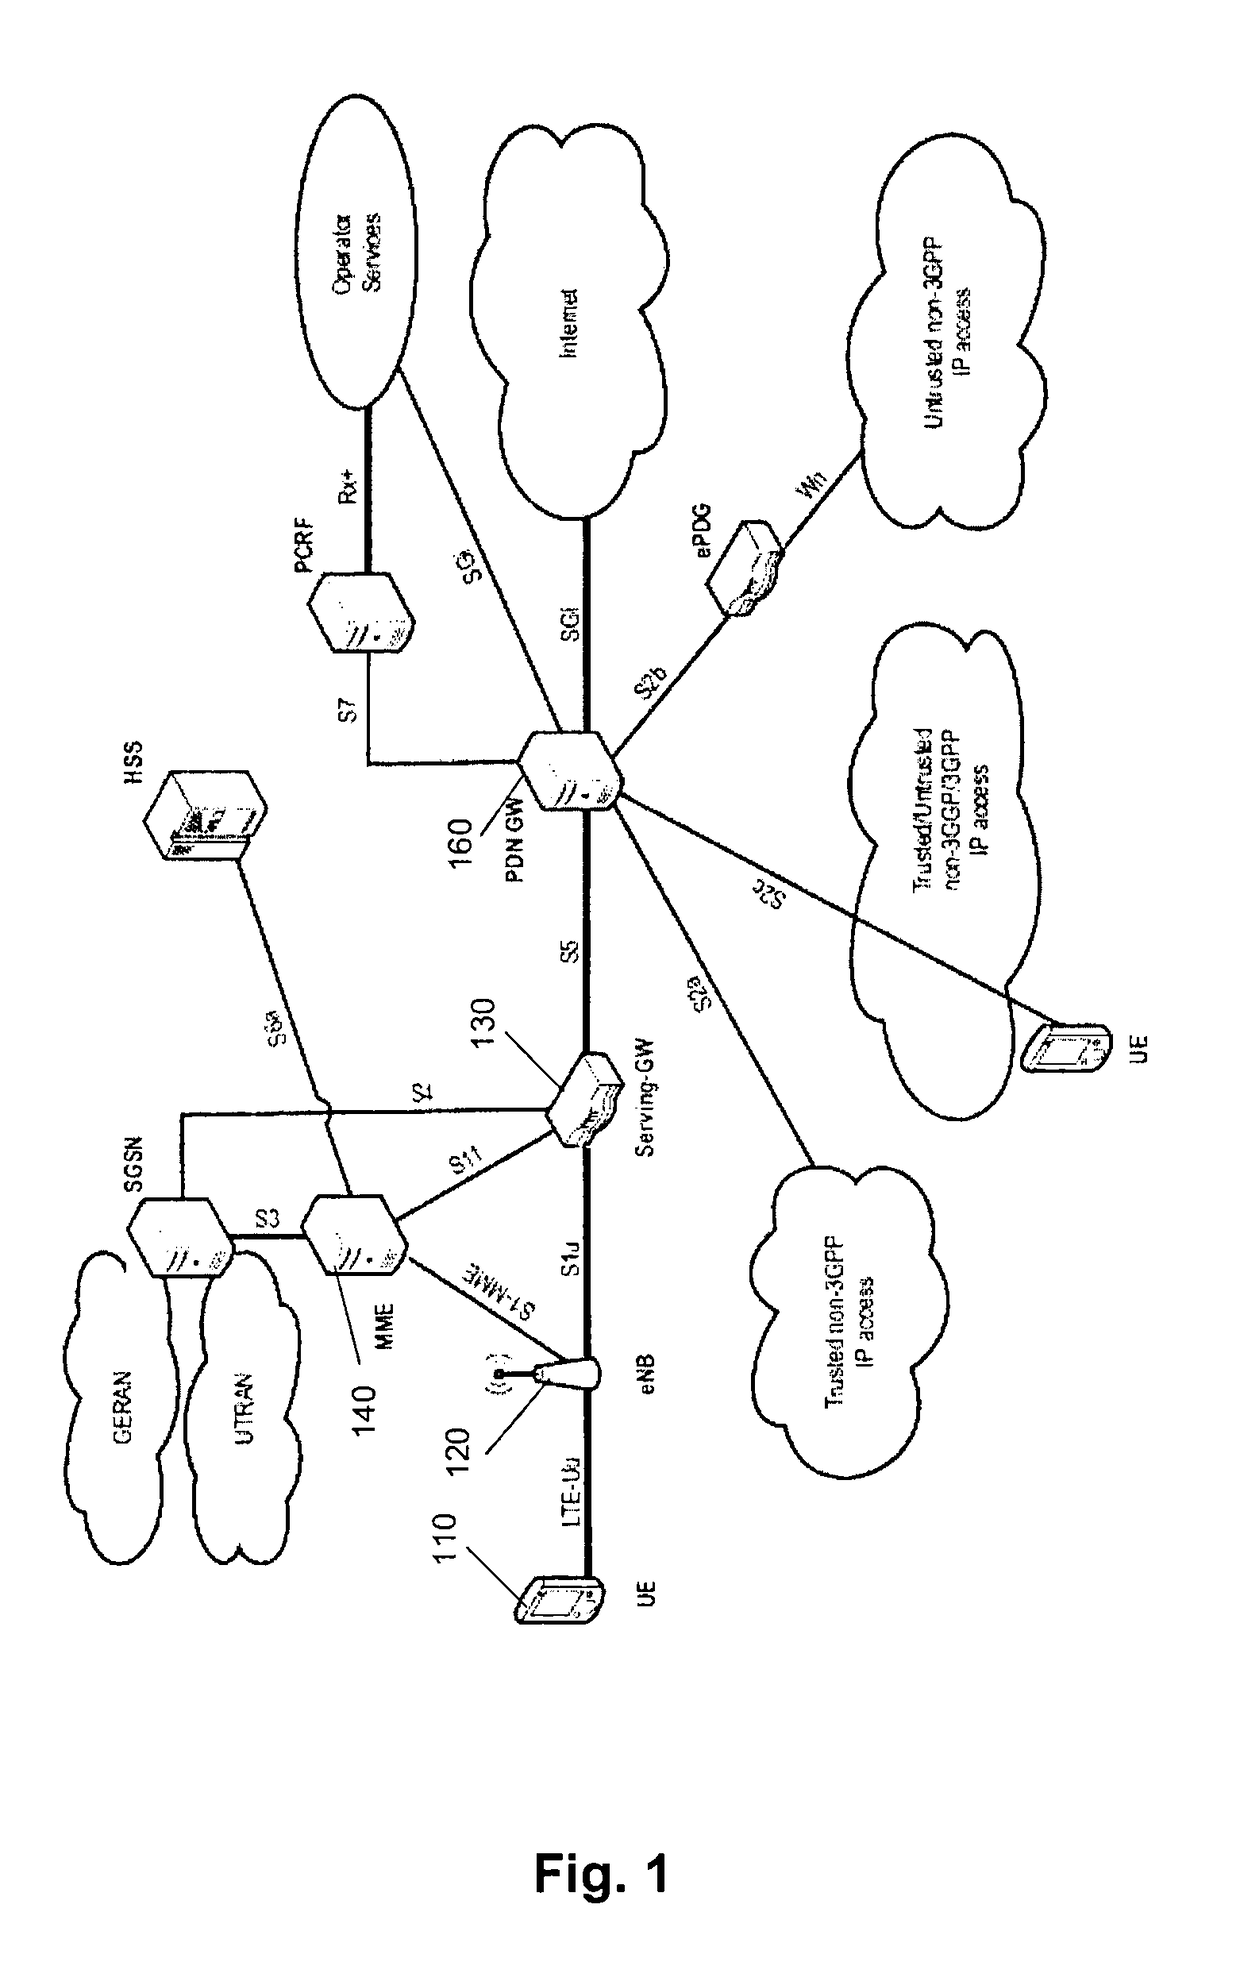 Interference parameter signaling for efficient interference cancellation and suppression